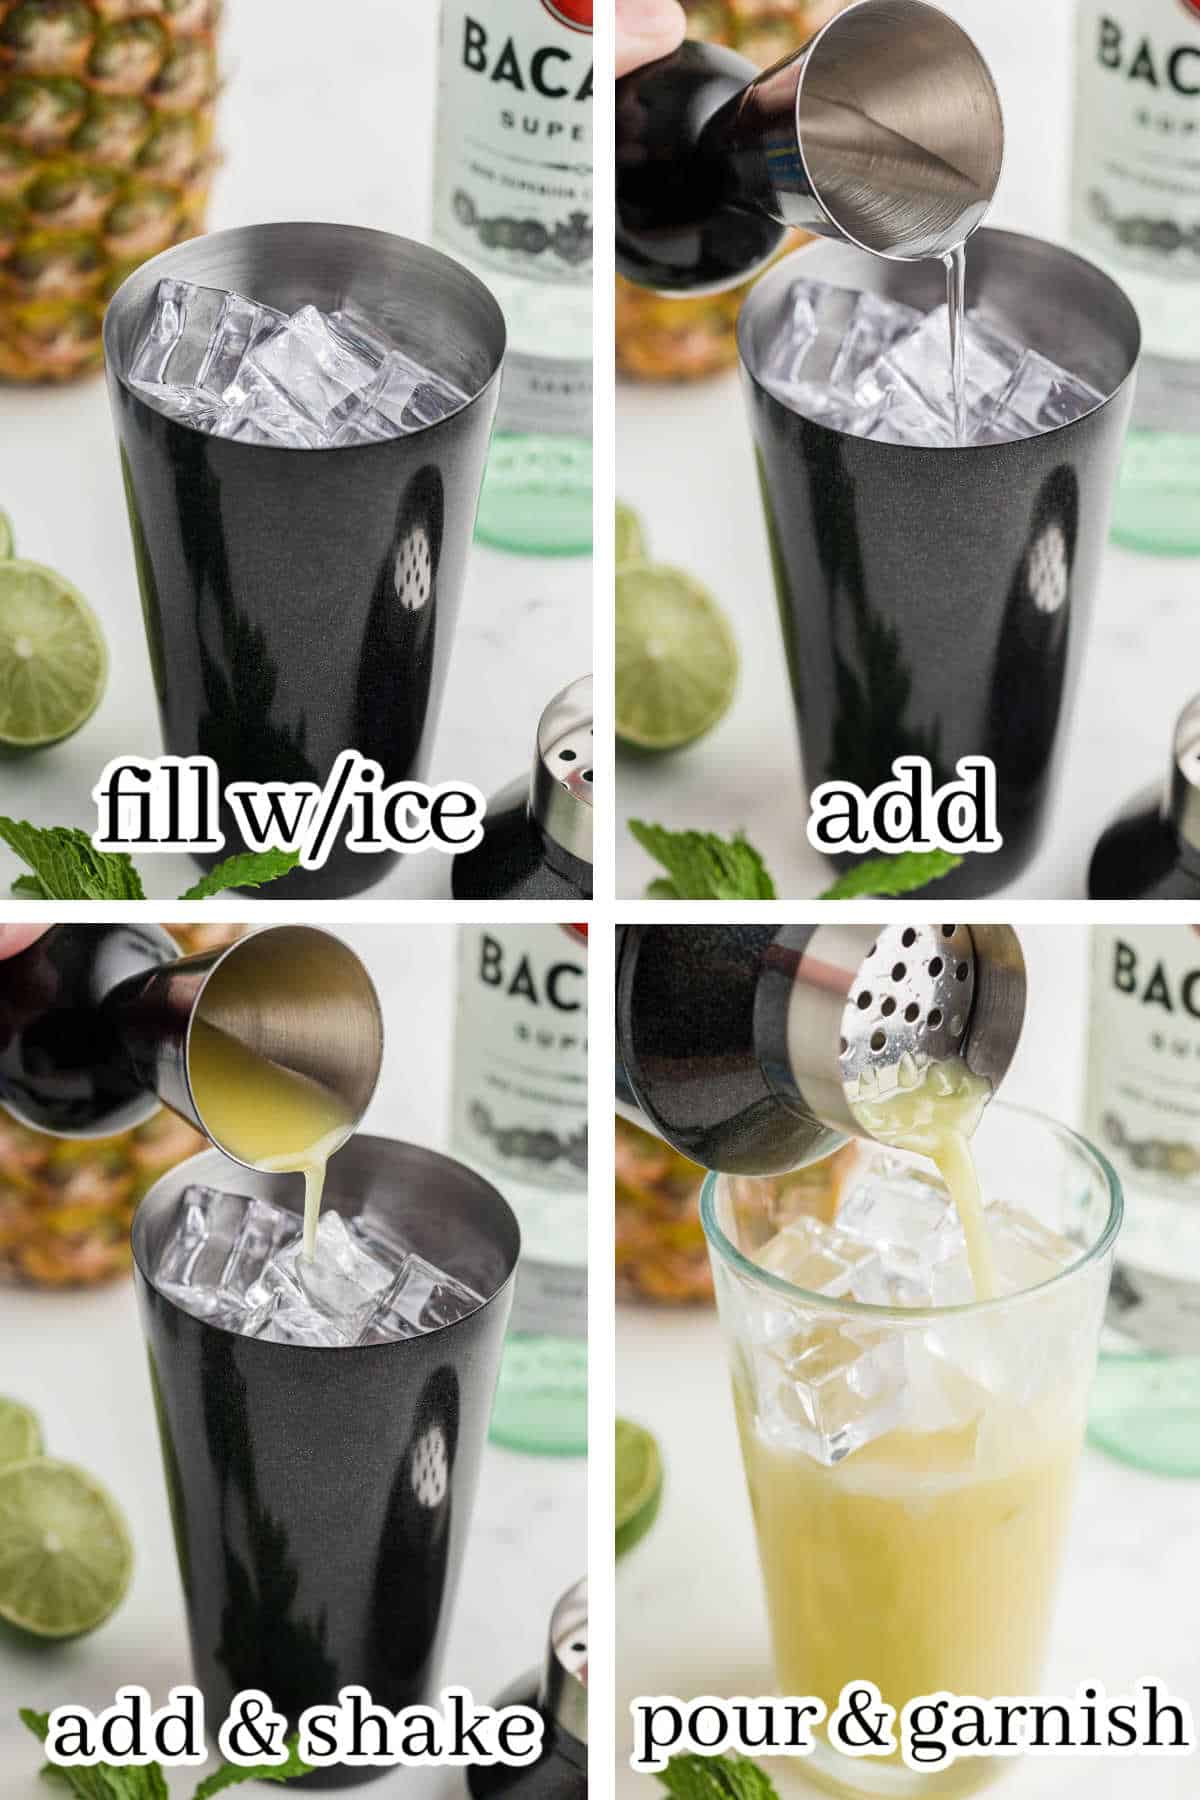 Step-by-step instructions to make the cocktail recipe. With print overlay for clarification.